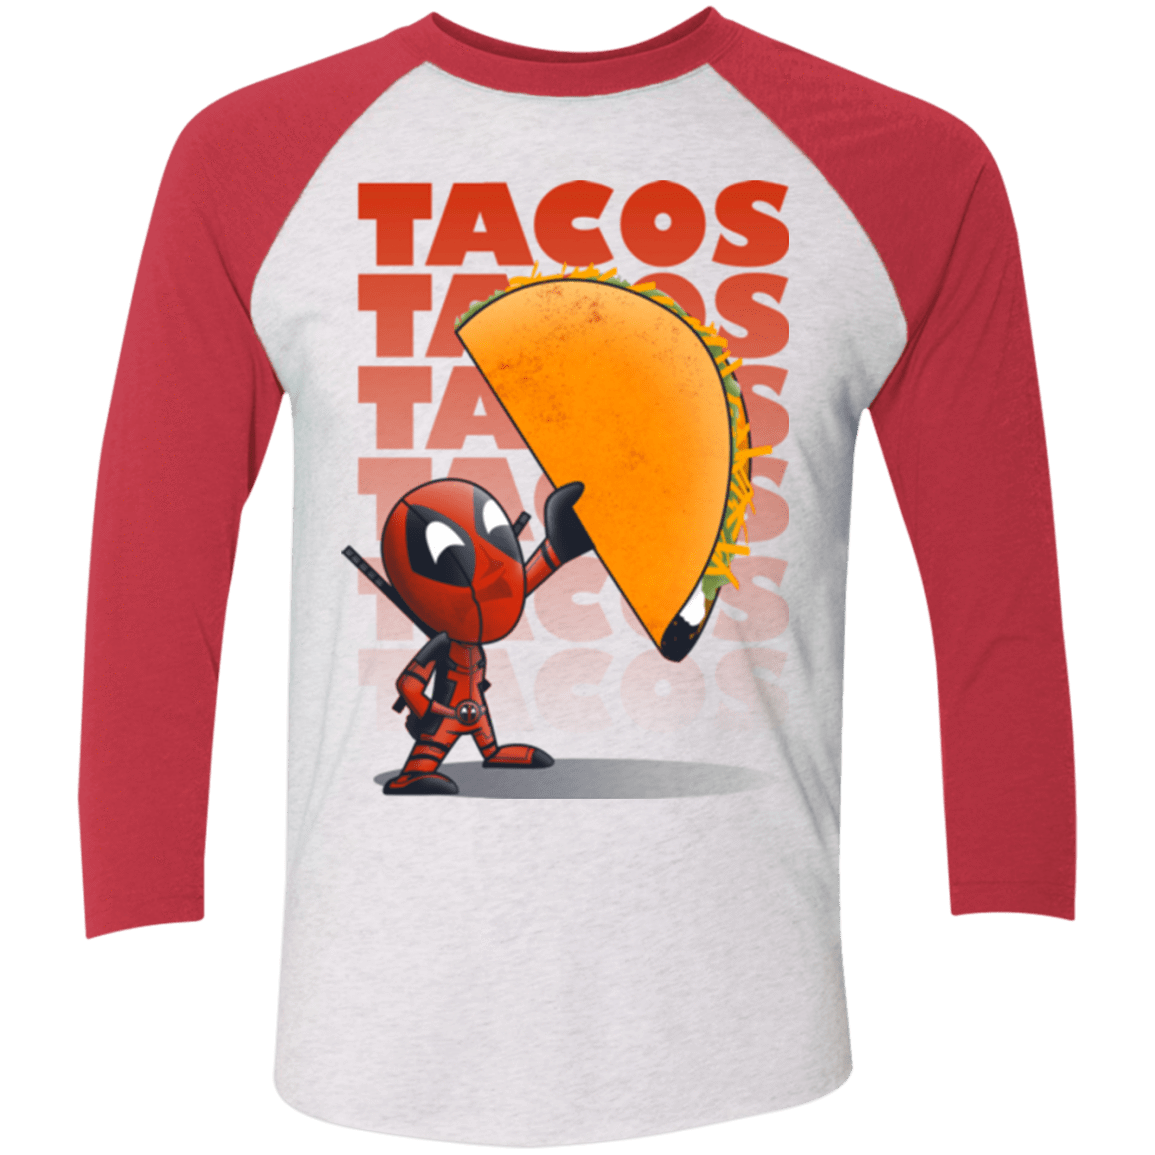 T-Shirts Heather White/Vintage Red / X-Small Tacos Triblend 3/4 Sleeve